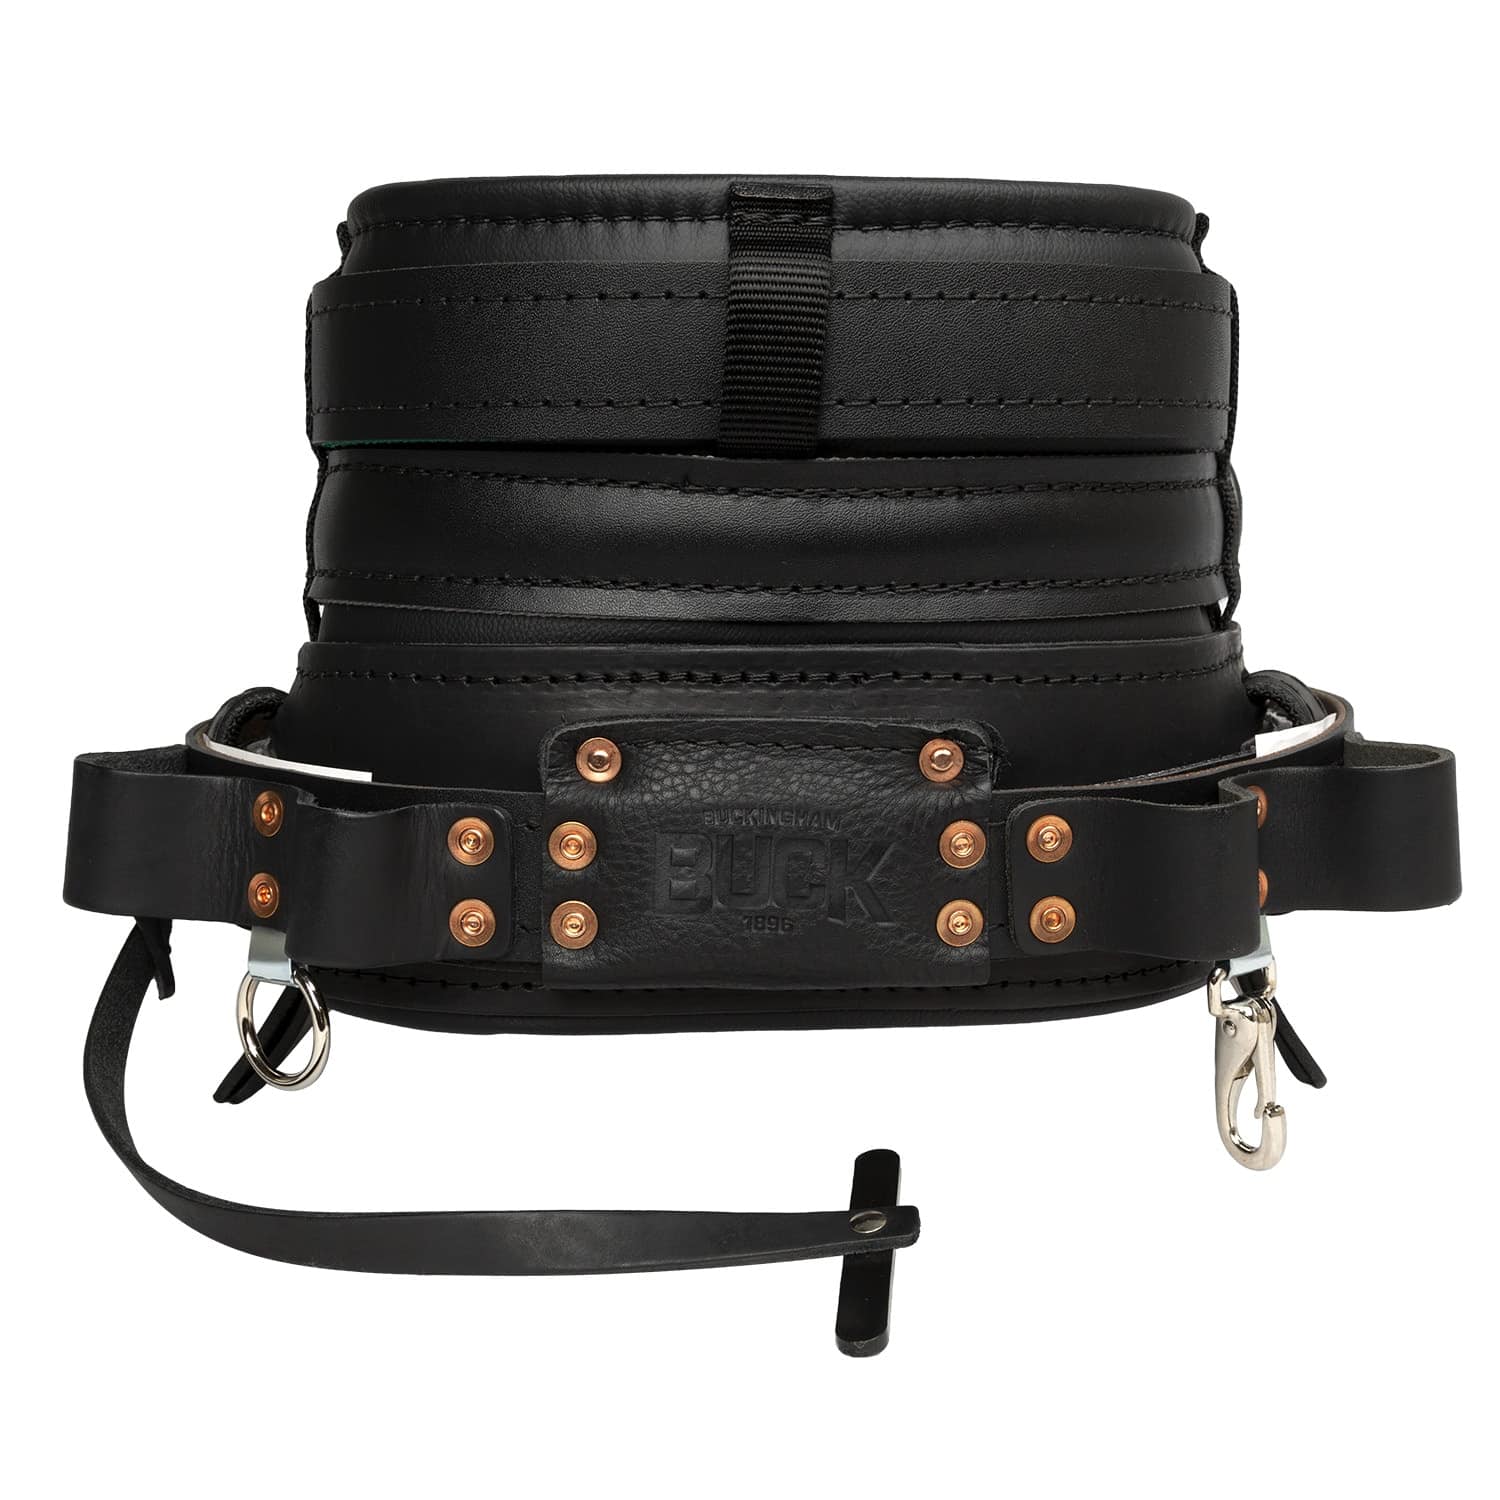 Buckingham 20182M Leather Mobility Belt from Columbia Safety